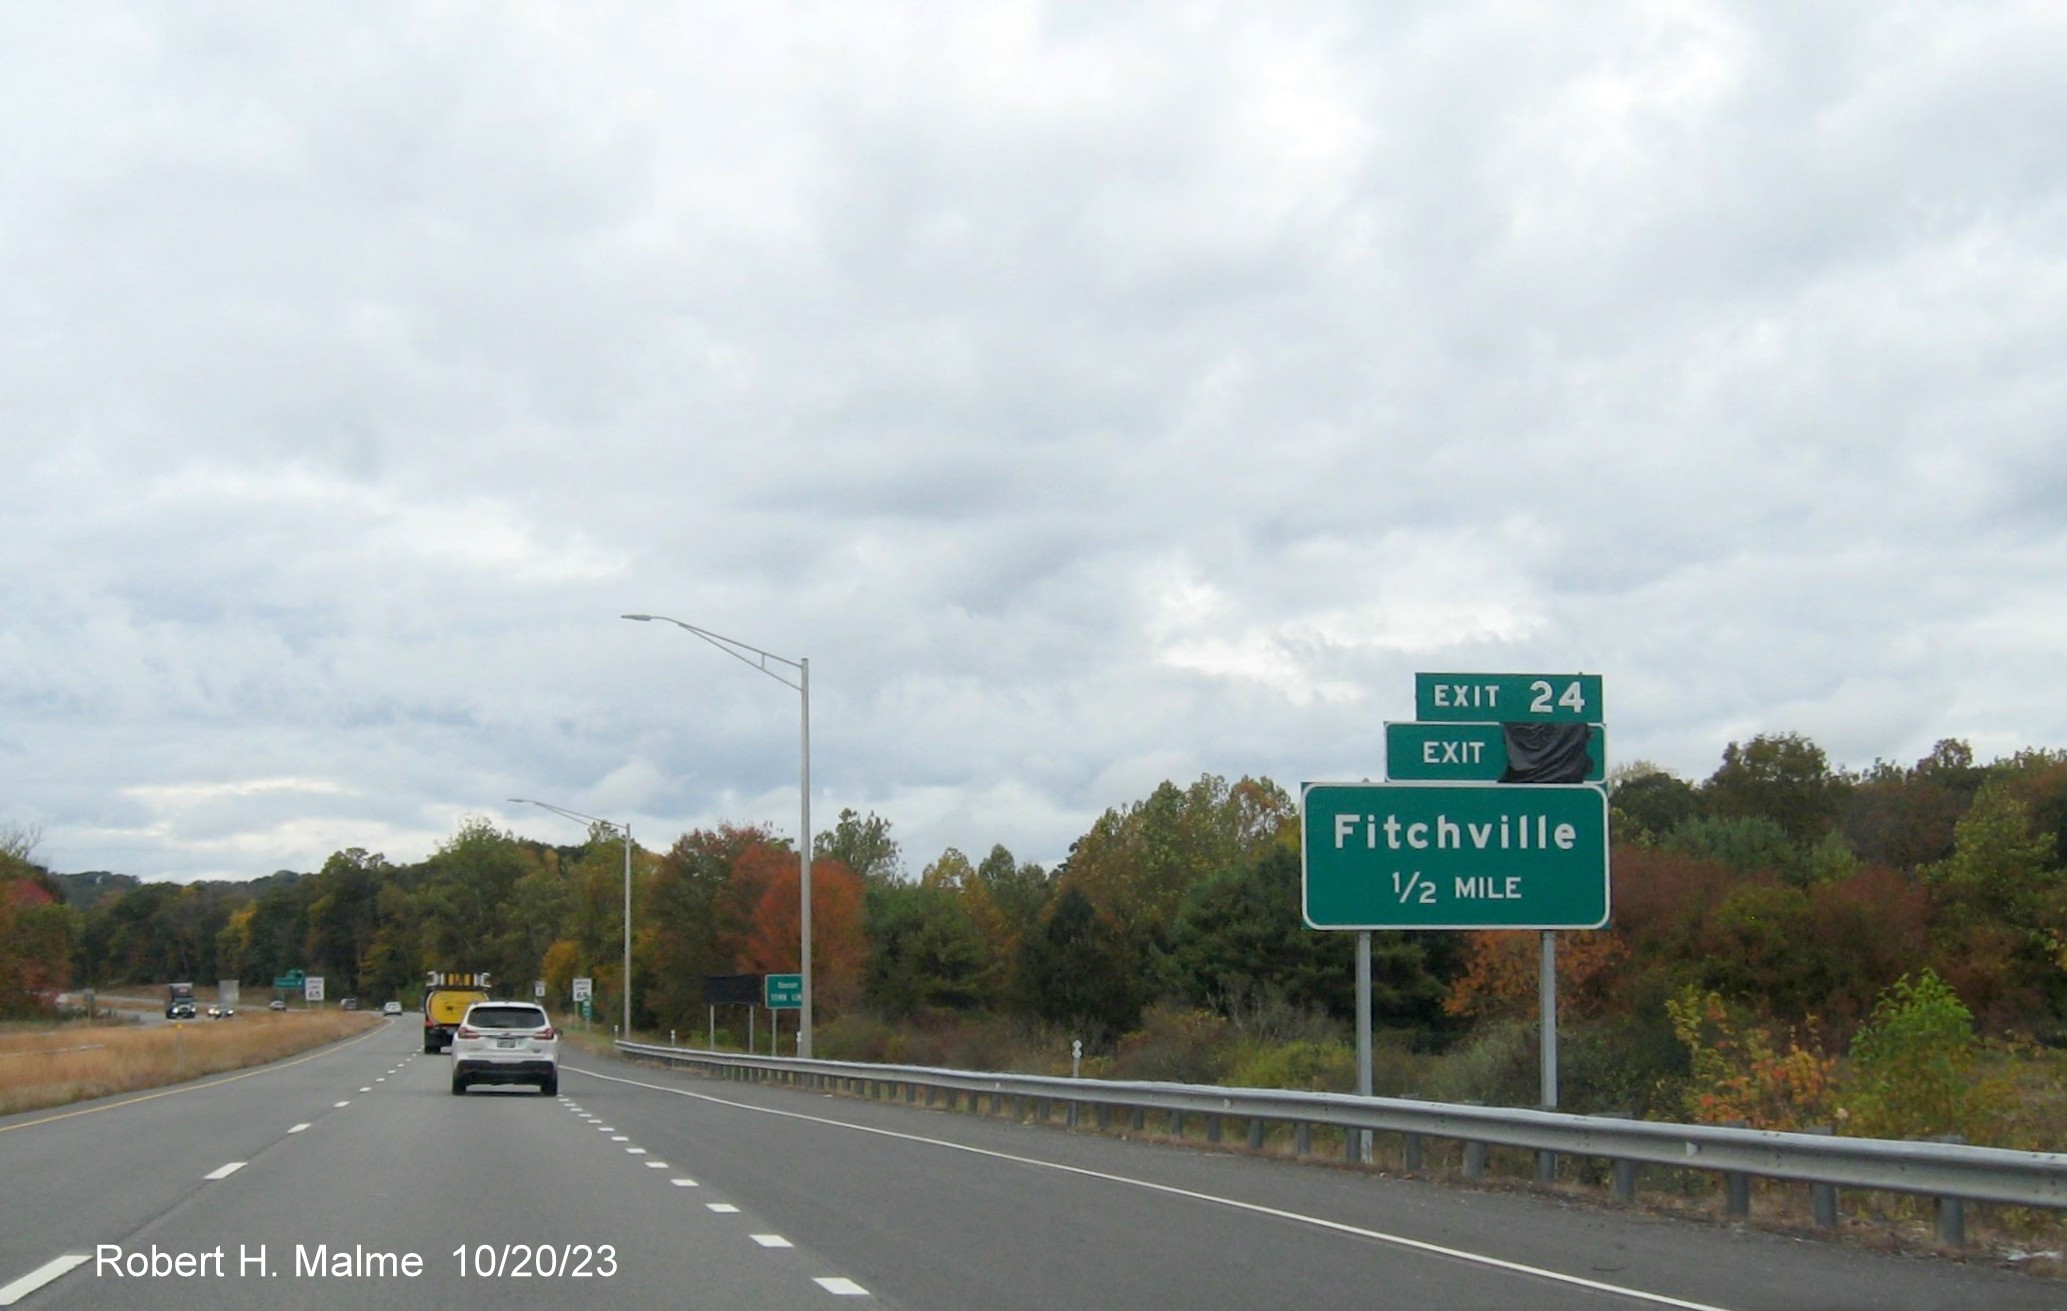 Image of new 1 mile advance sign for Fitchville exit on CT 2 West in Norwich with future milepost exit number
      (34) covered over and exit tab from former sign put on top as temporary exit tab, October 2023